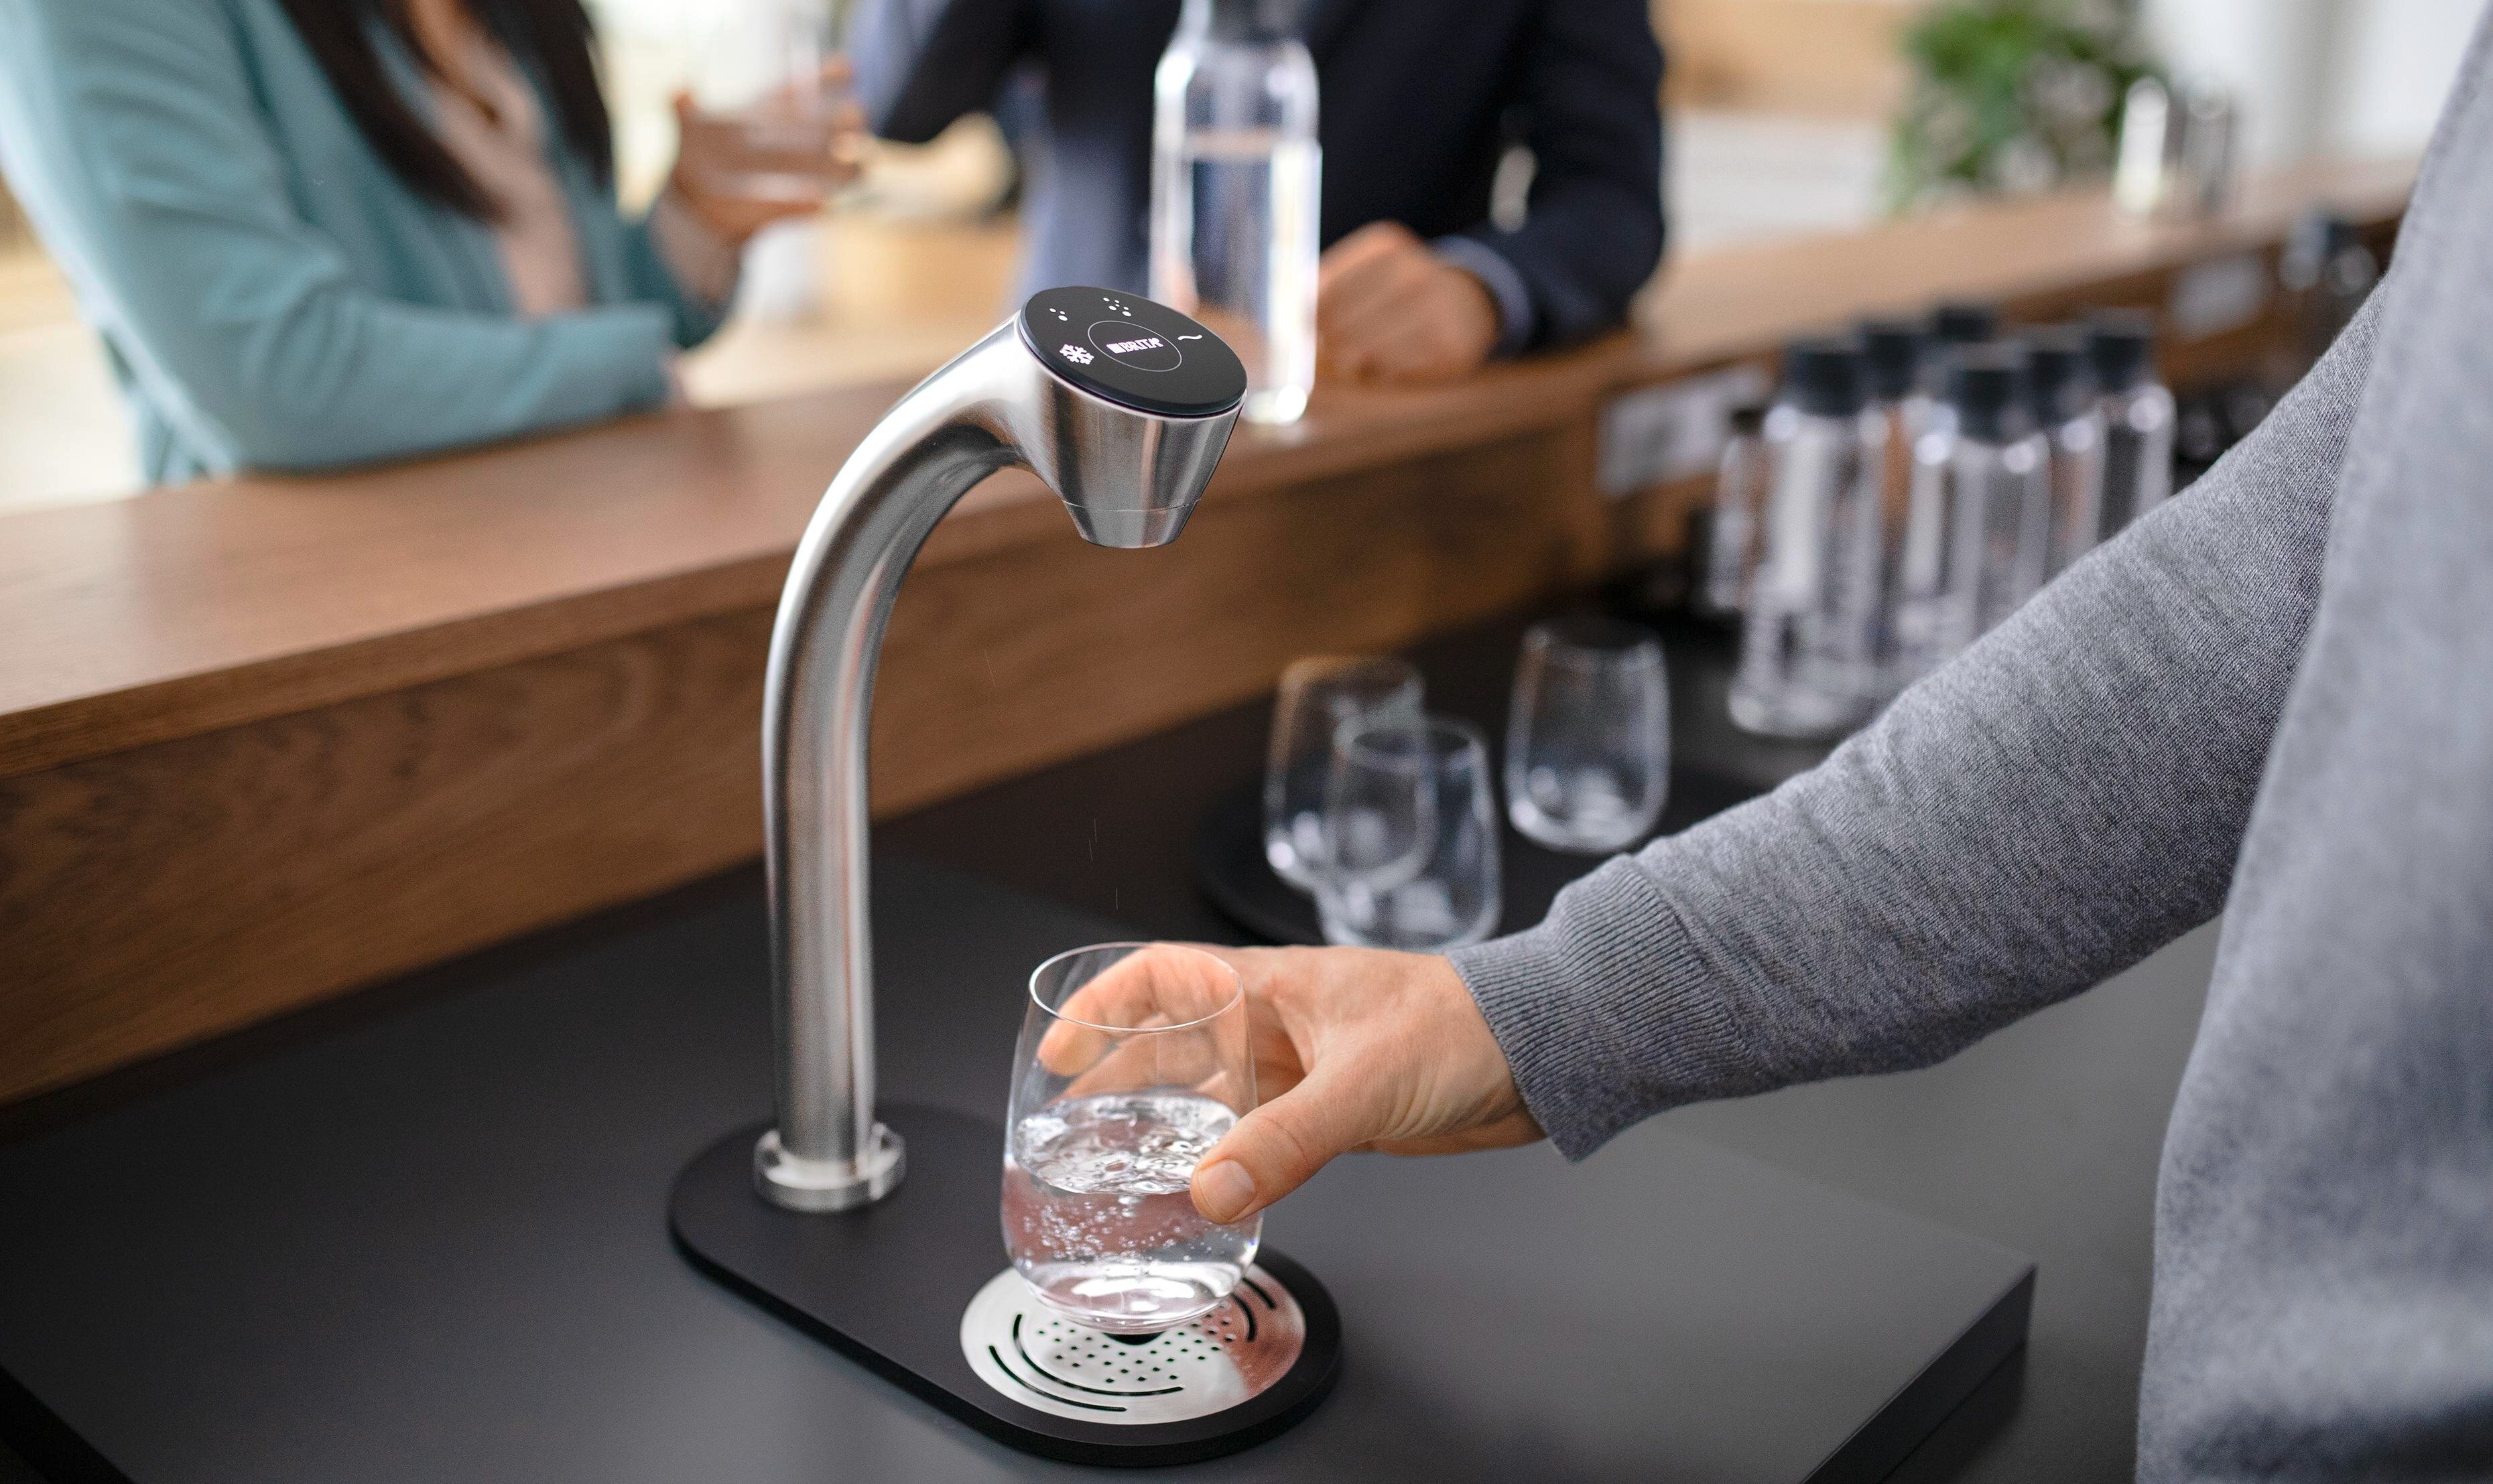 Prioritising health and hydration: how to support customers and staff in 2022